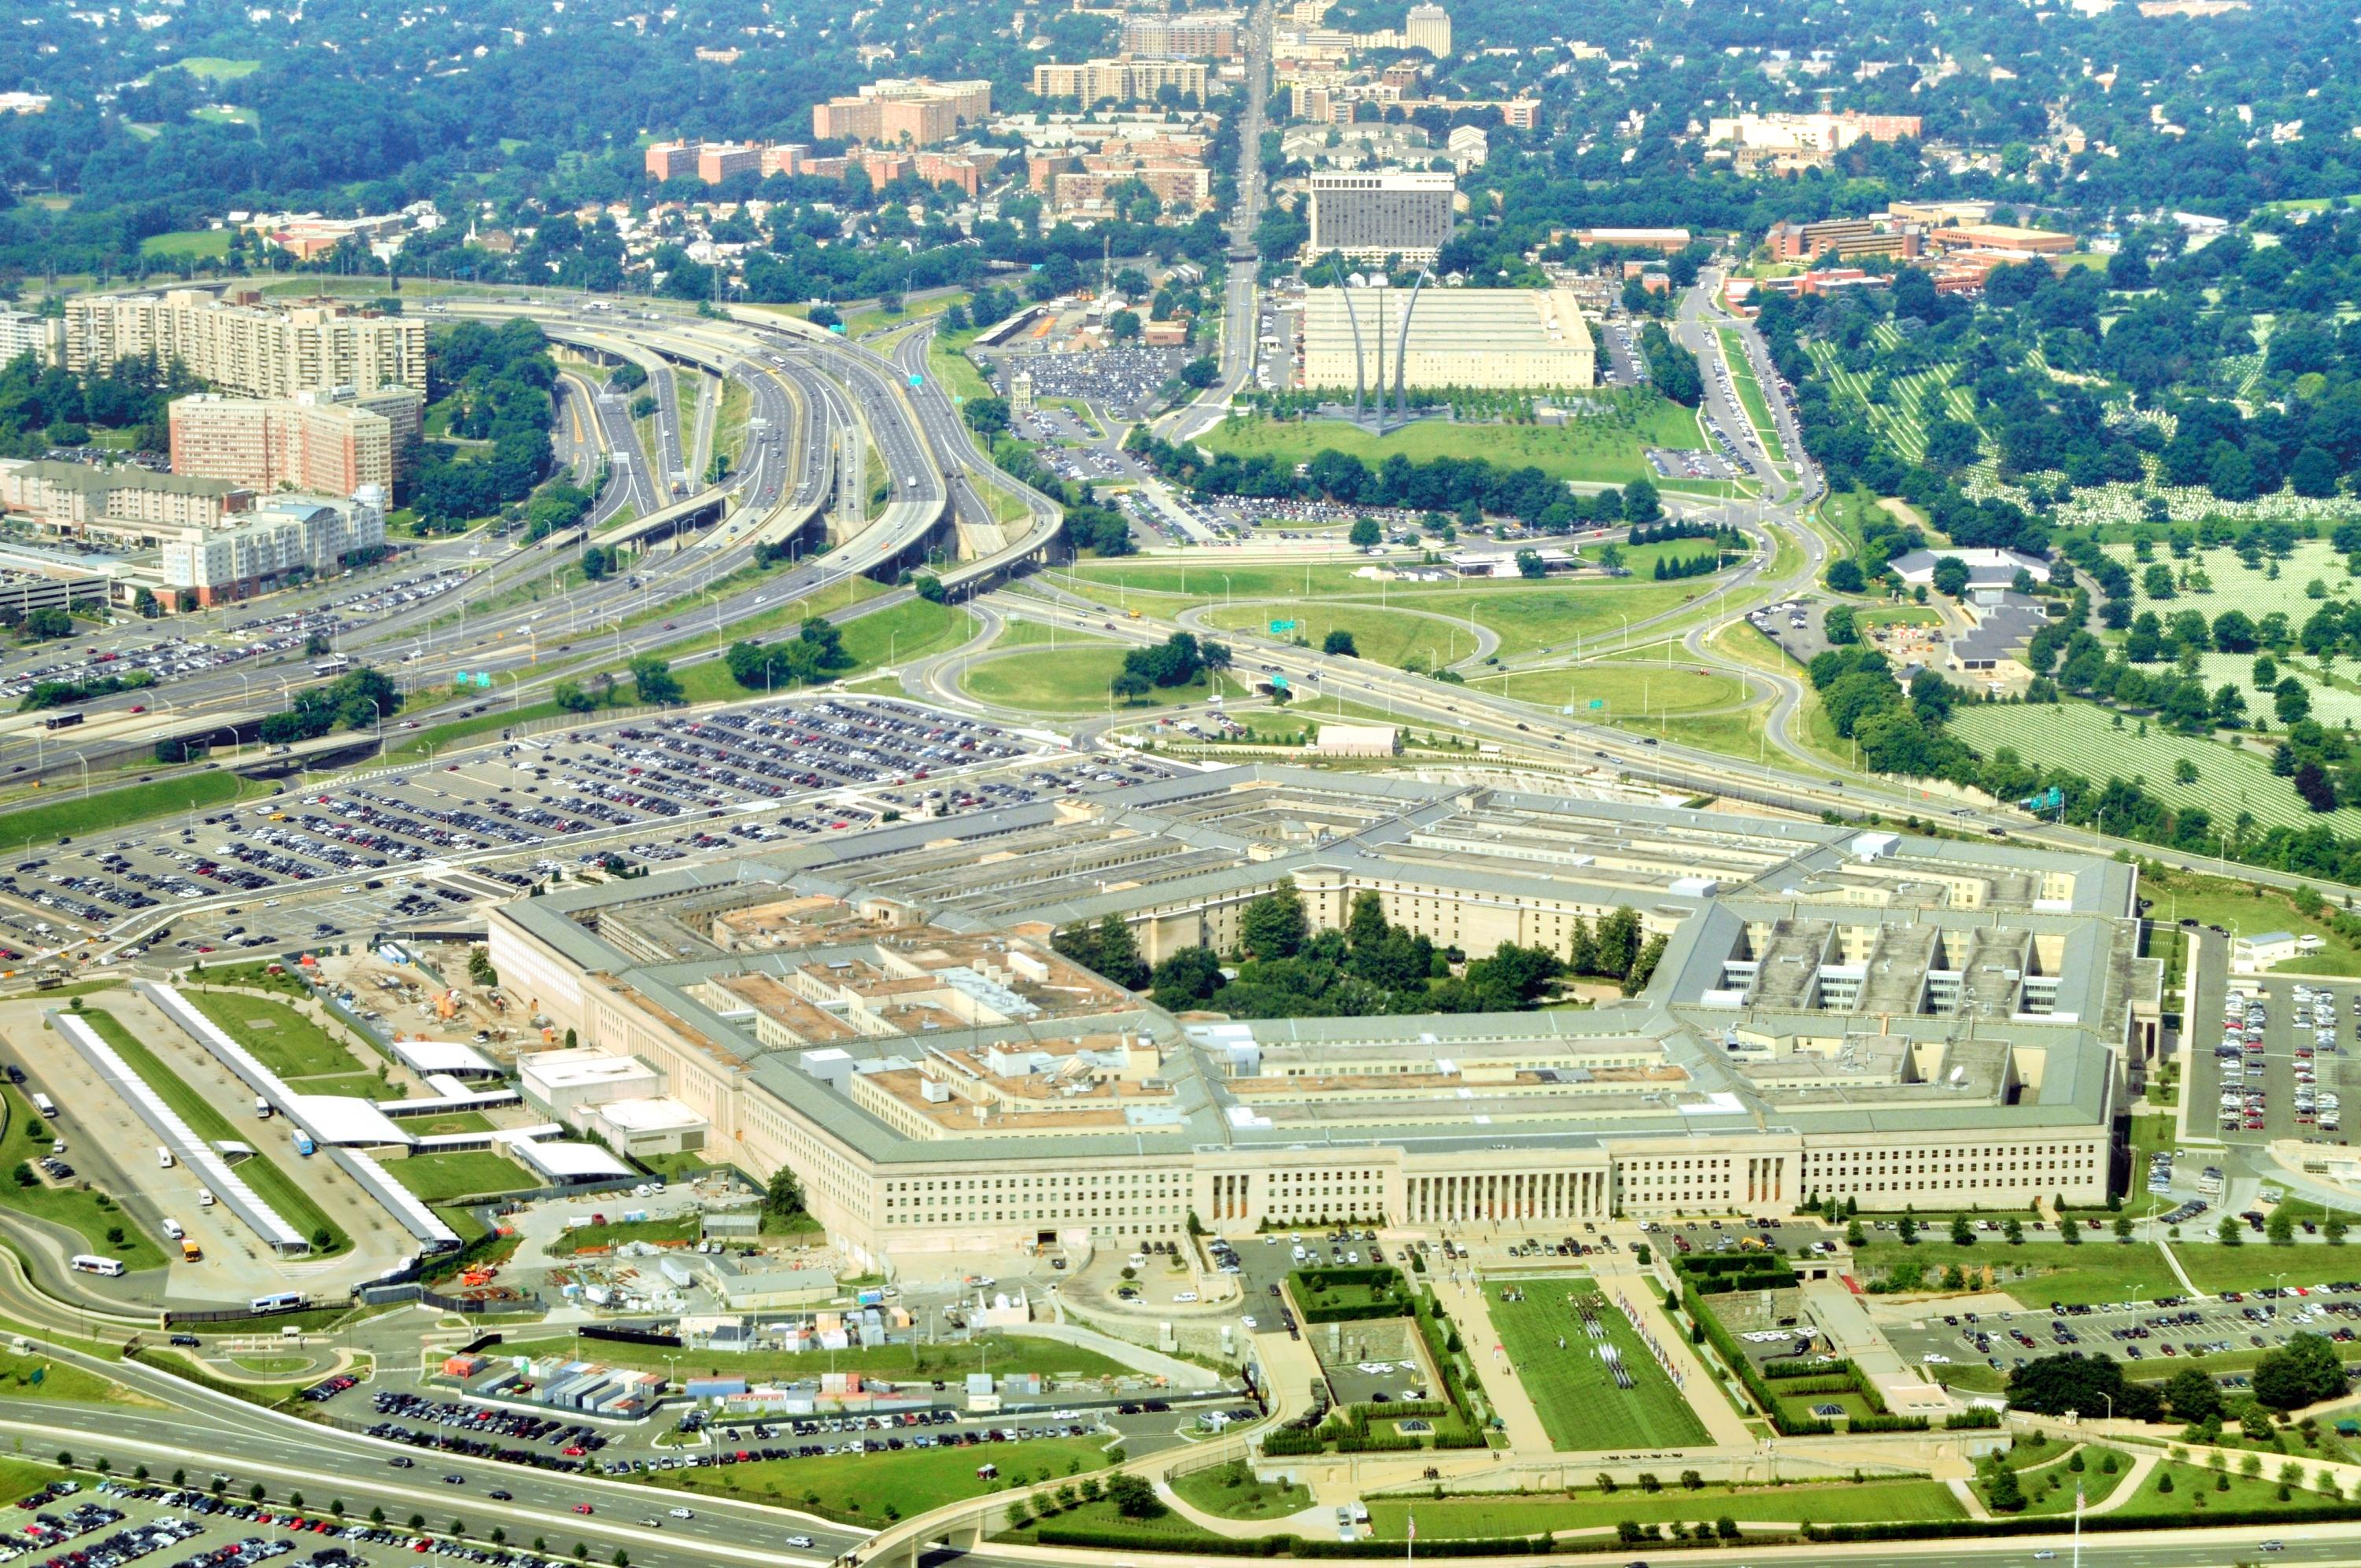 The Pentagon Attraction Reviews The Pentagon Tickets The Pentagon Discounts The Pentagon Transportation Address Opening Hours Attractions Hotels And Food Near The Pentagon Trip Com